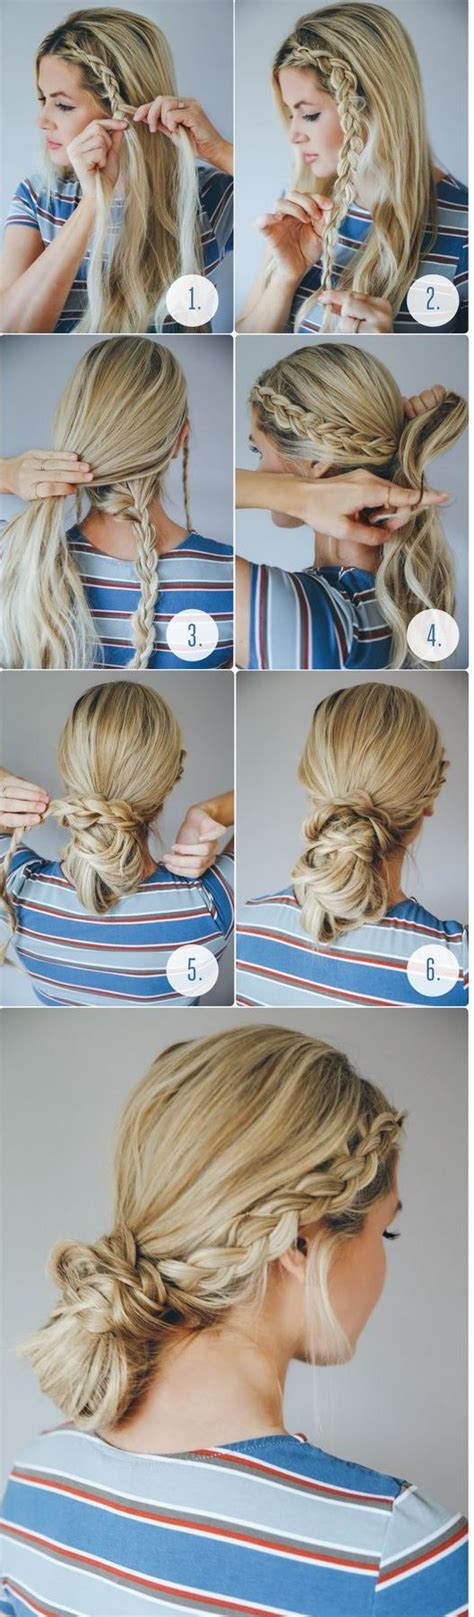 Never Easier 10 Hairstyles Ready For Less Than 5 Minutes Braided Bun